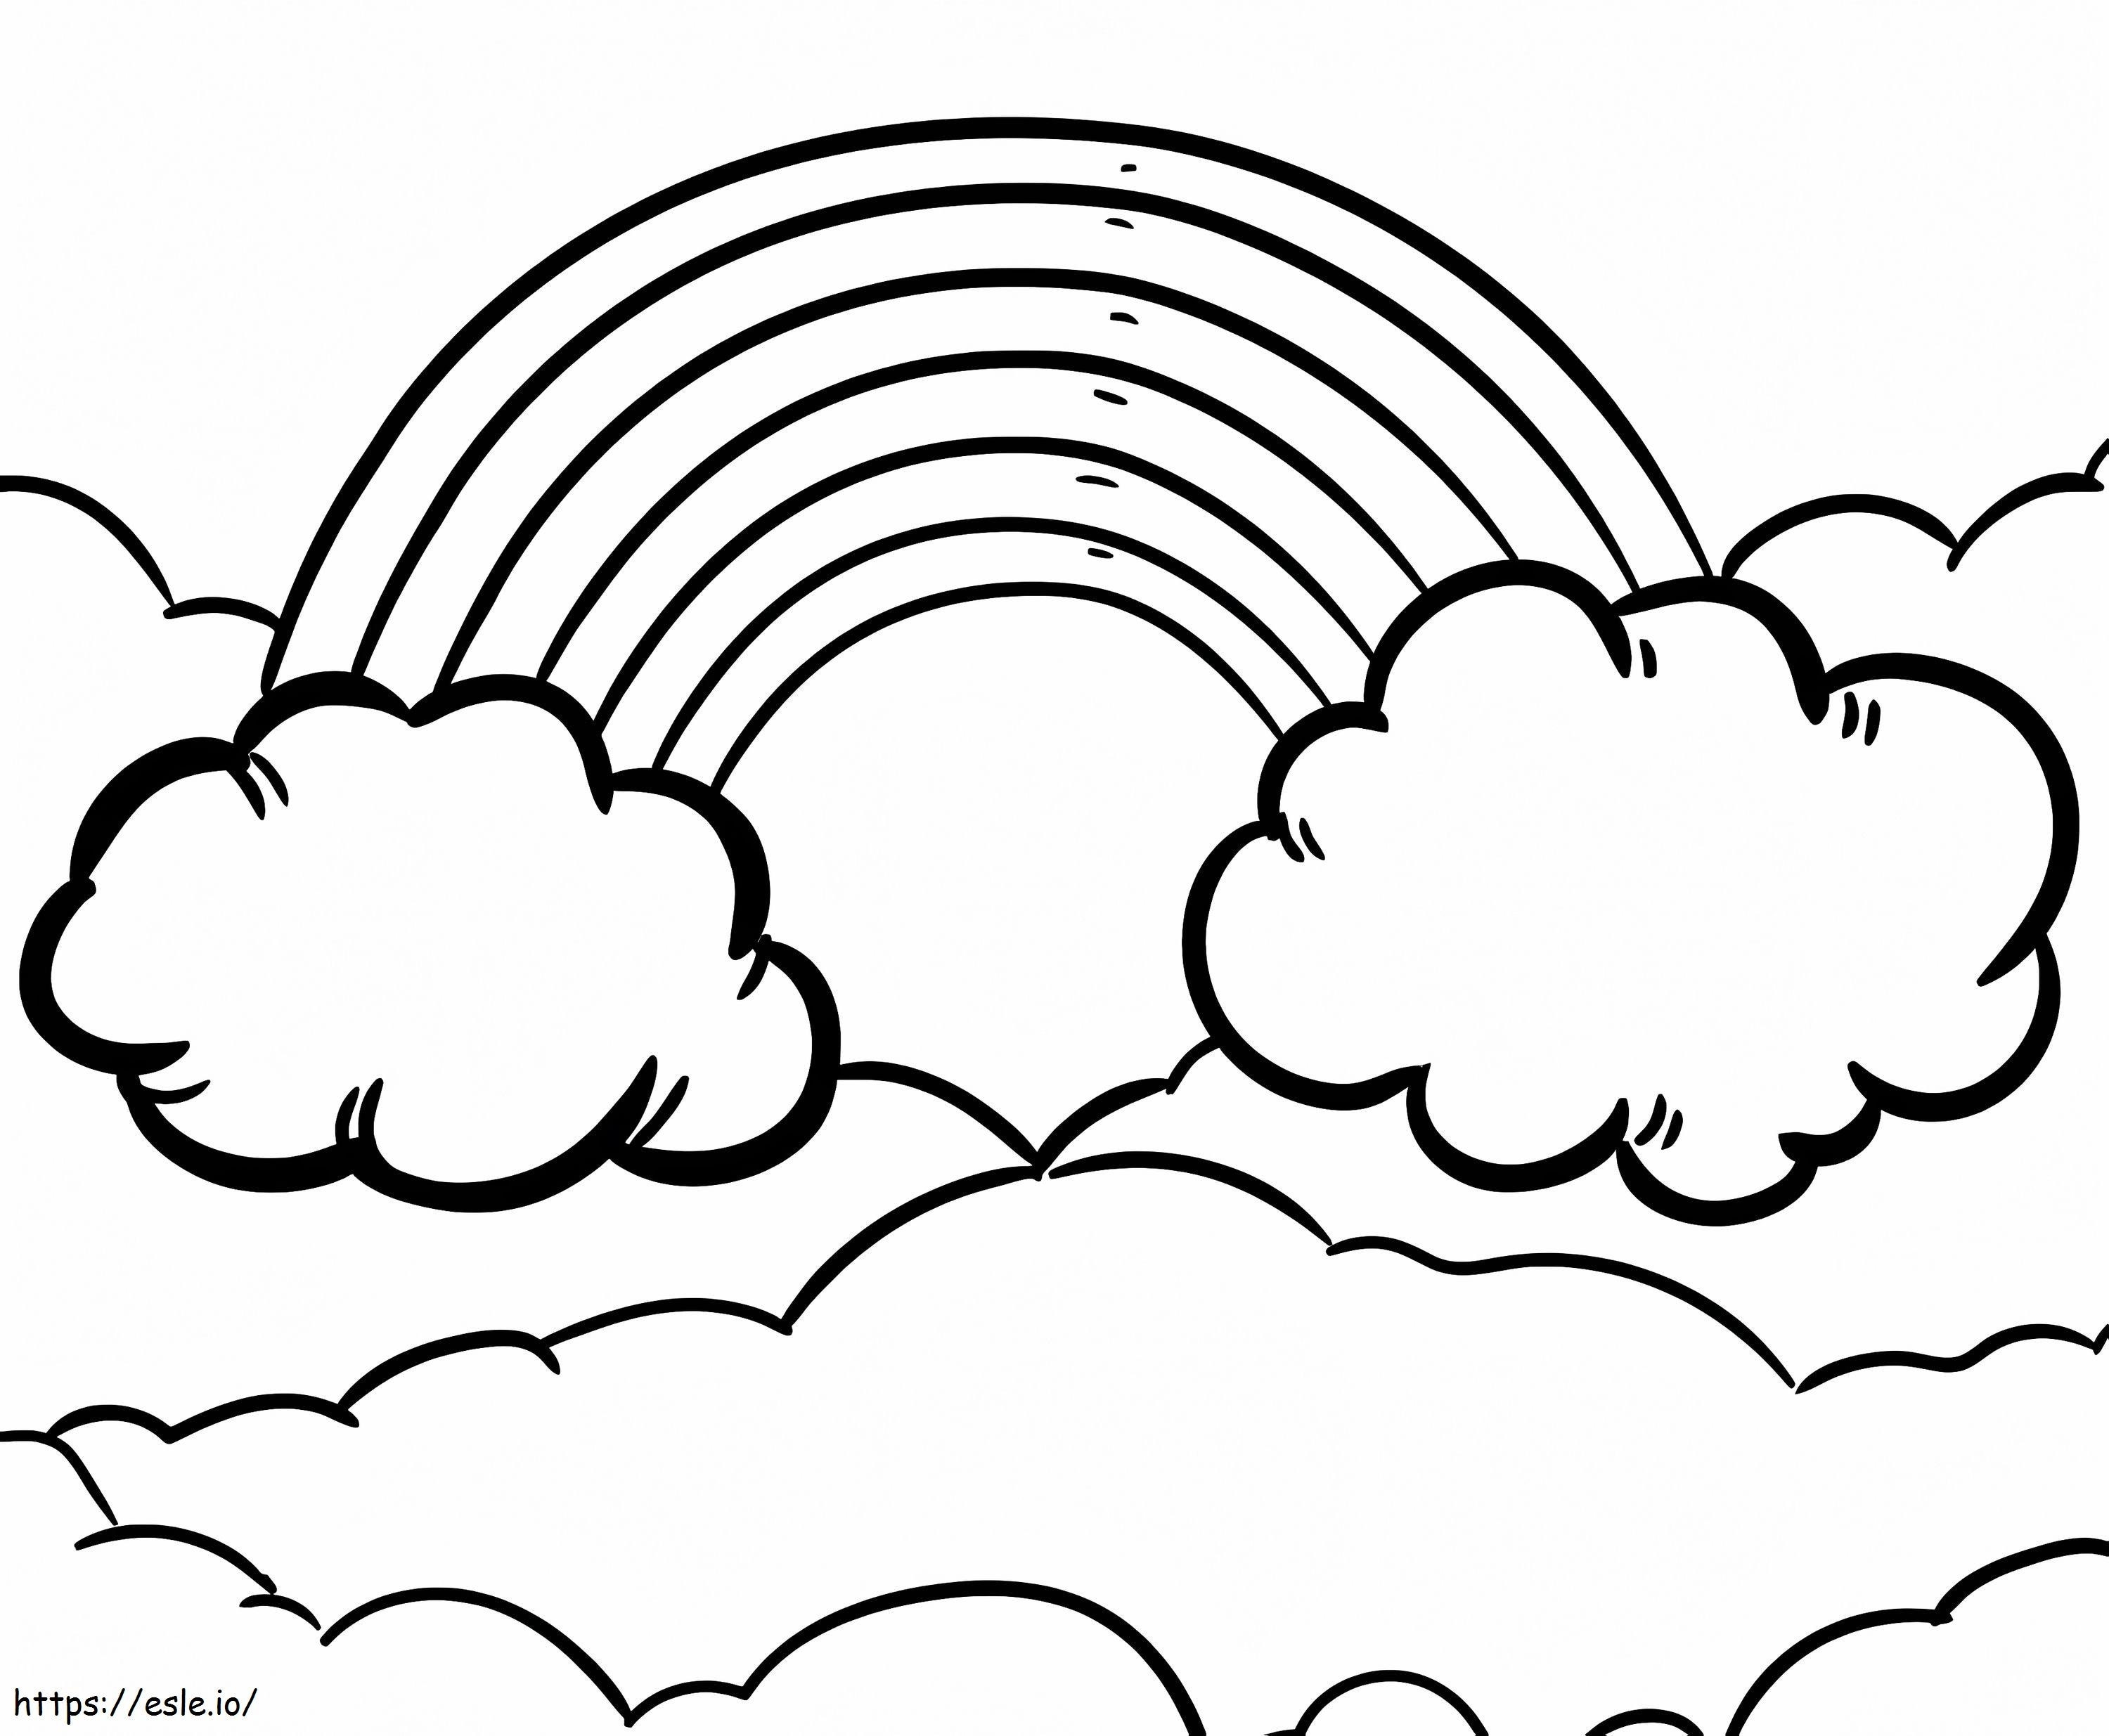 Rainbow In Sky coloring page